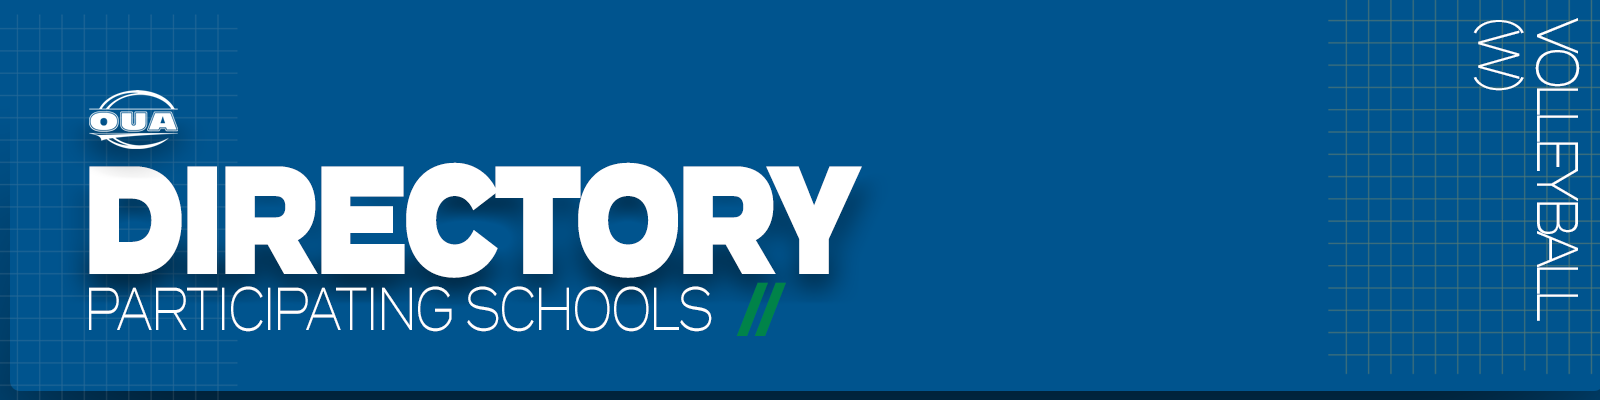 Predominantly blue graphic with large white text on the left side that reads 'Directory, Participating Schools' and small white vertical text on the right side that reads 'Volleyball W'